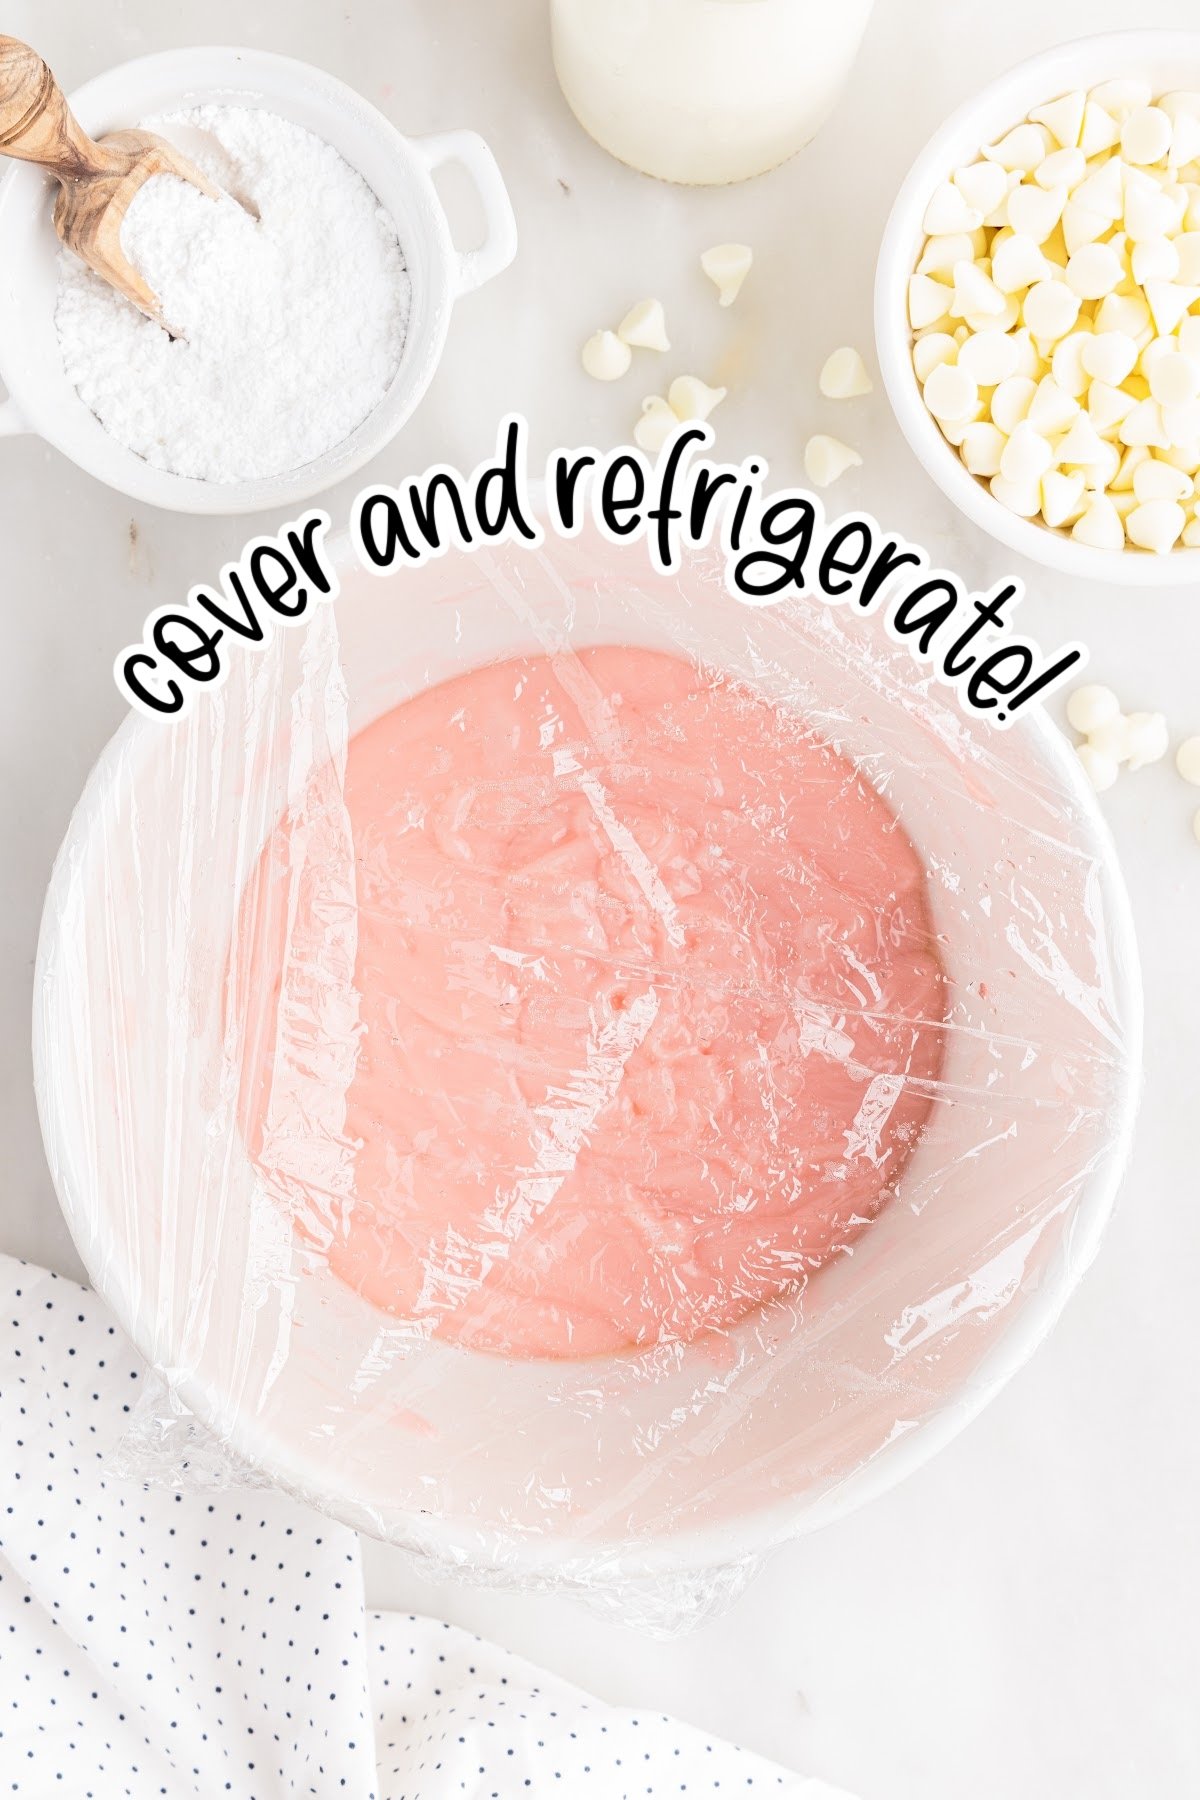 Plastic wrap covered bowl with pink strawberry truffle batter inside.